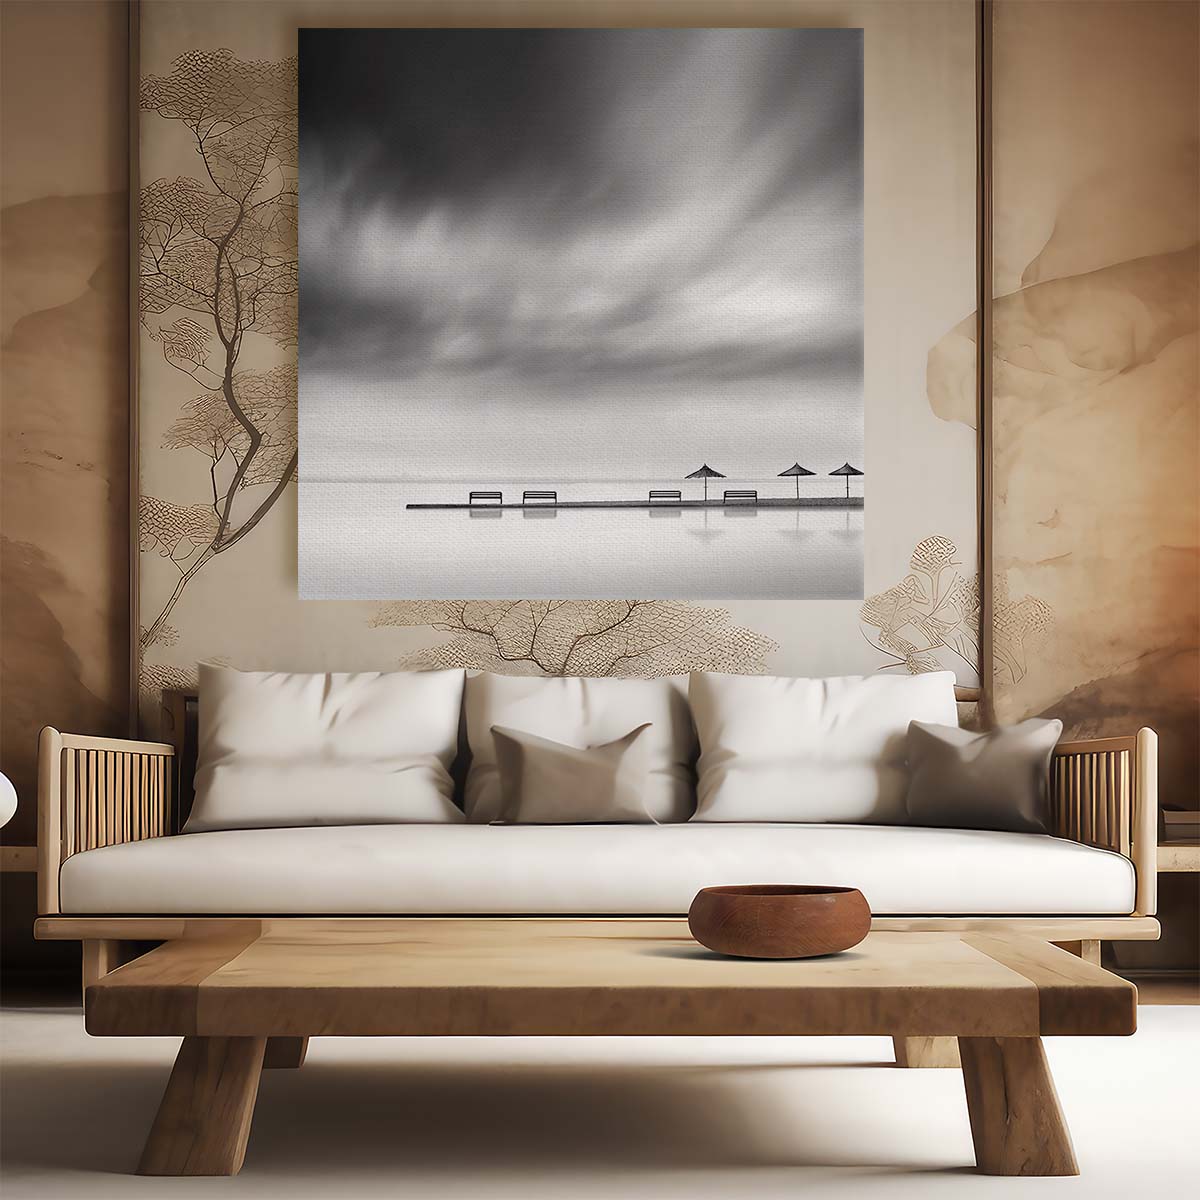 Monochrome Serene Beach Landscape with Benches & Umbrellas Wall Art by Luxuriance Designs. Made in USA.